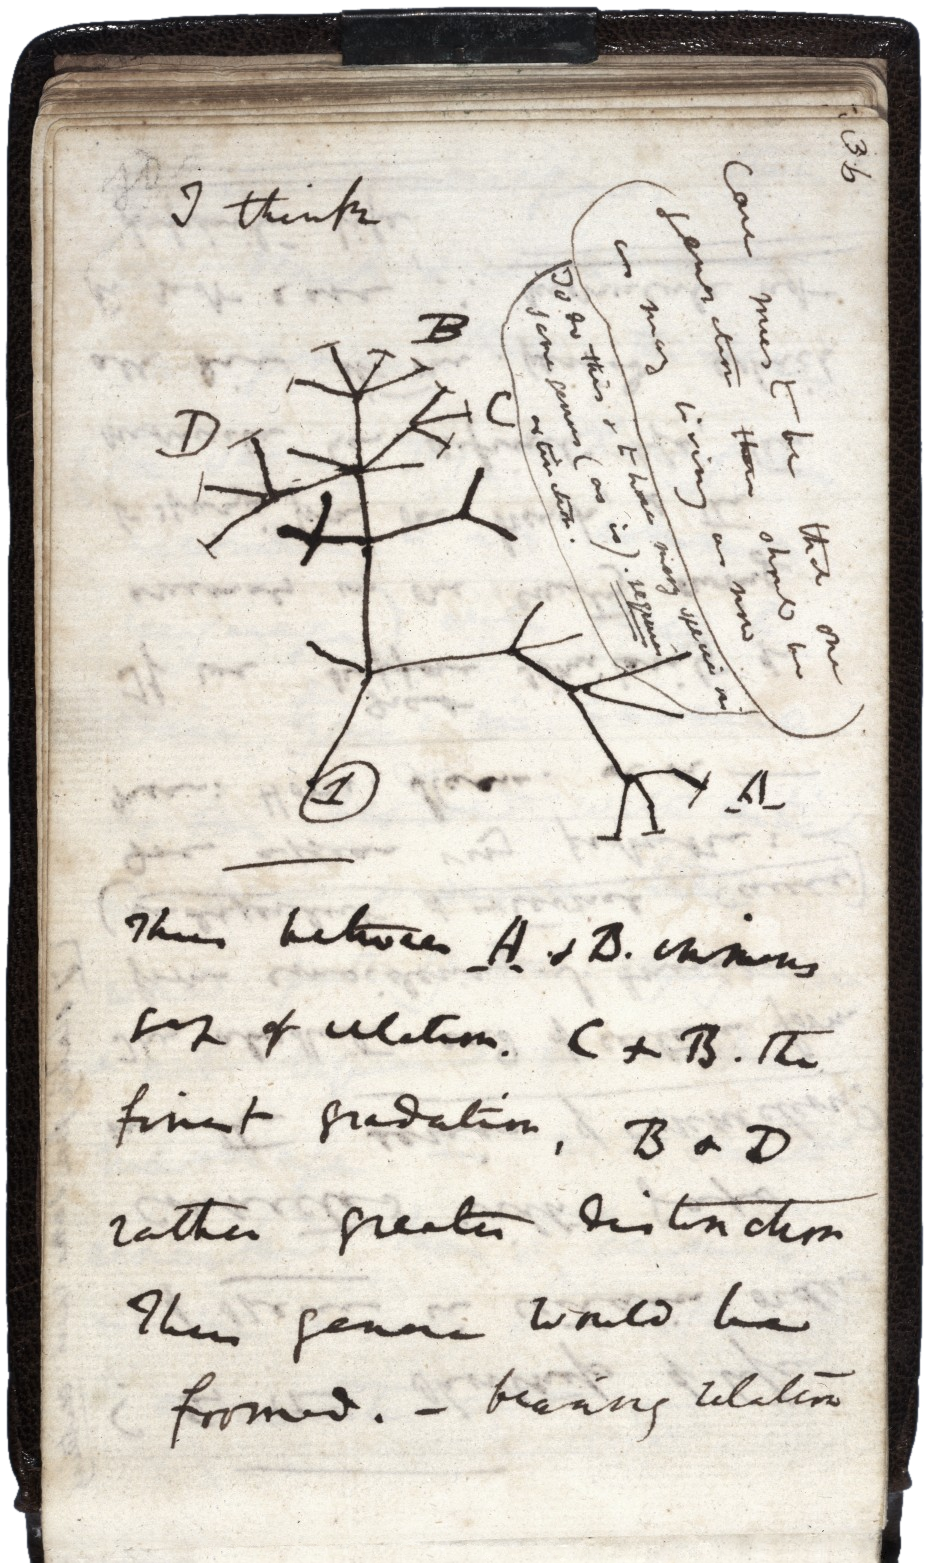 Charles Darwin’s 1837 first sketch of an evolutionary tree, prefaced by the words “i think”